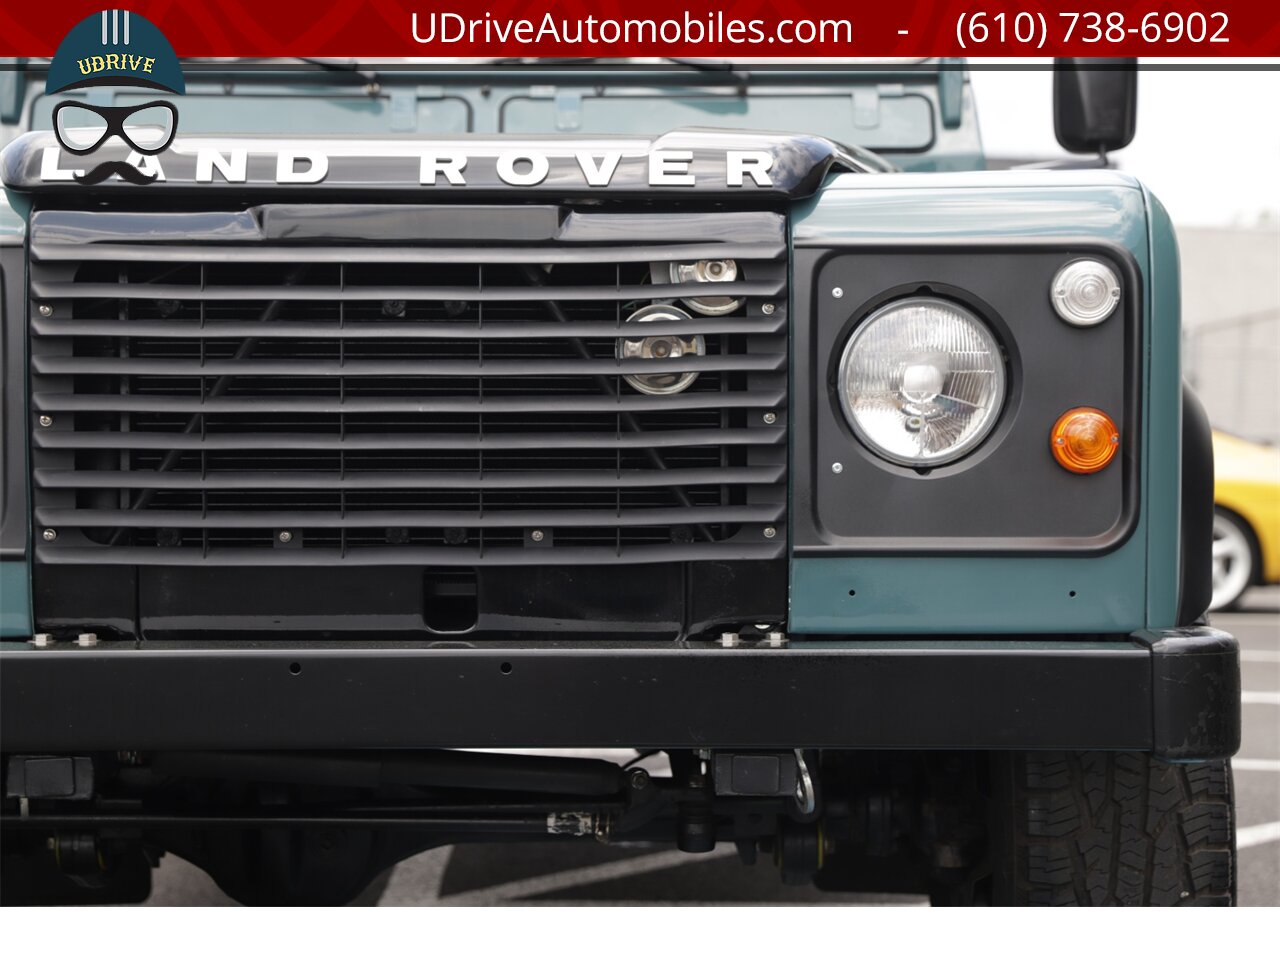 1986 Land Rover Defender 90 D90 4.0L V8 5 Speed Manual New Interior  $25k Recent Engine Build - Photo 12 - West Chester, PA 19382